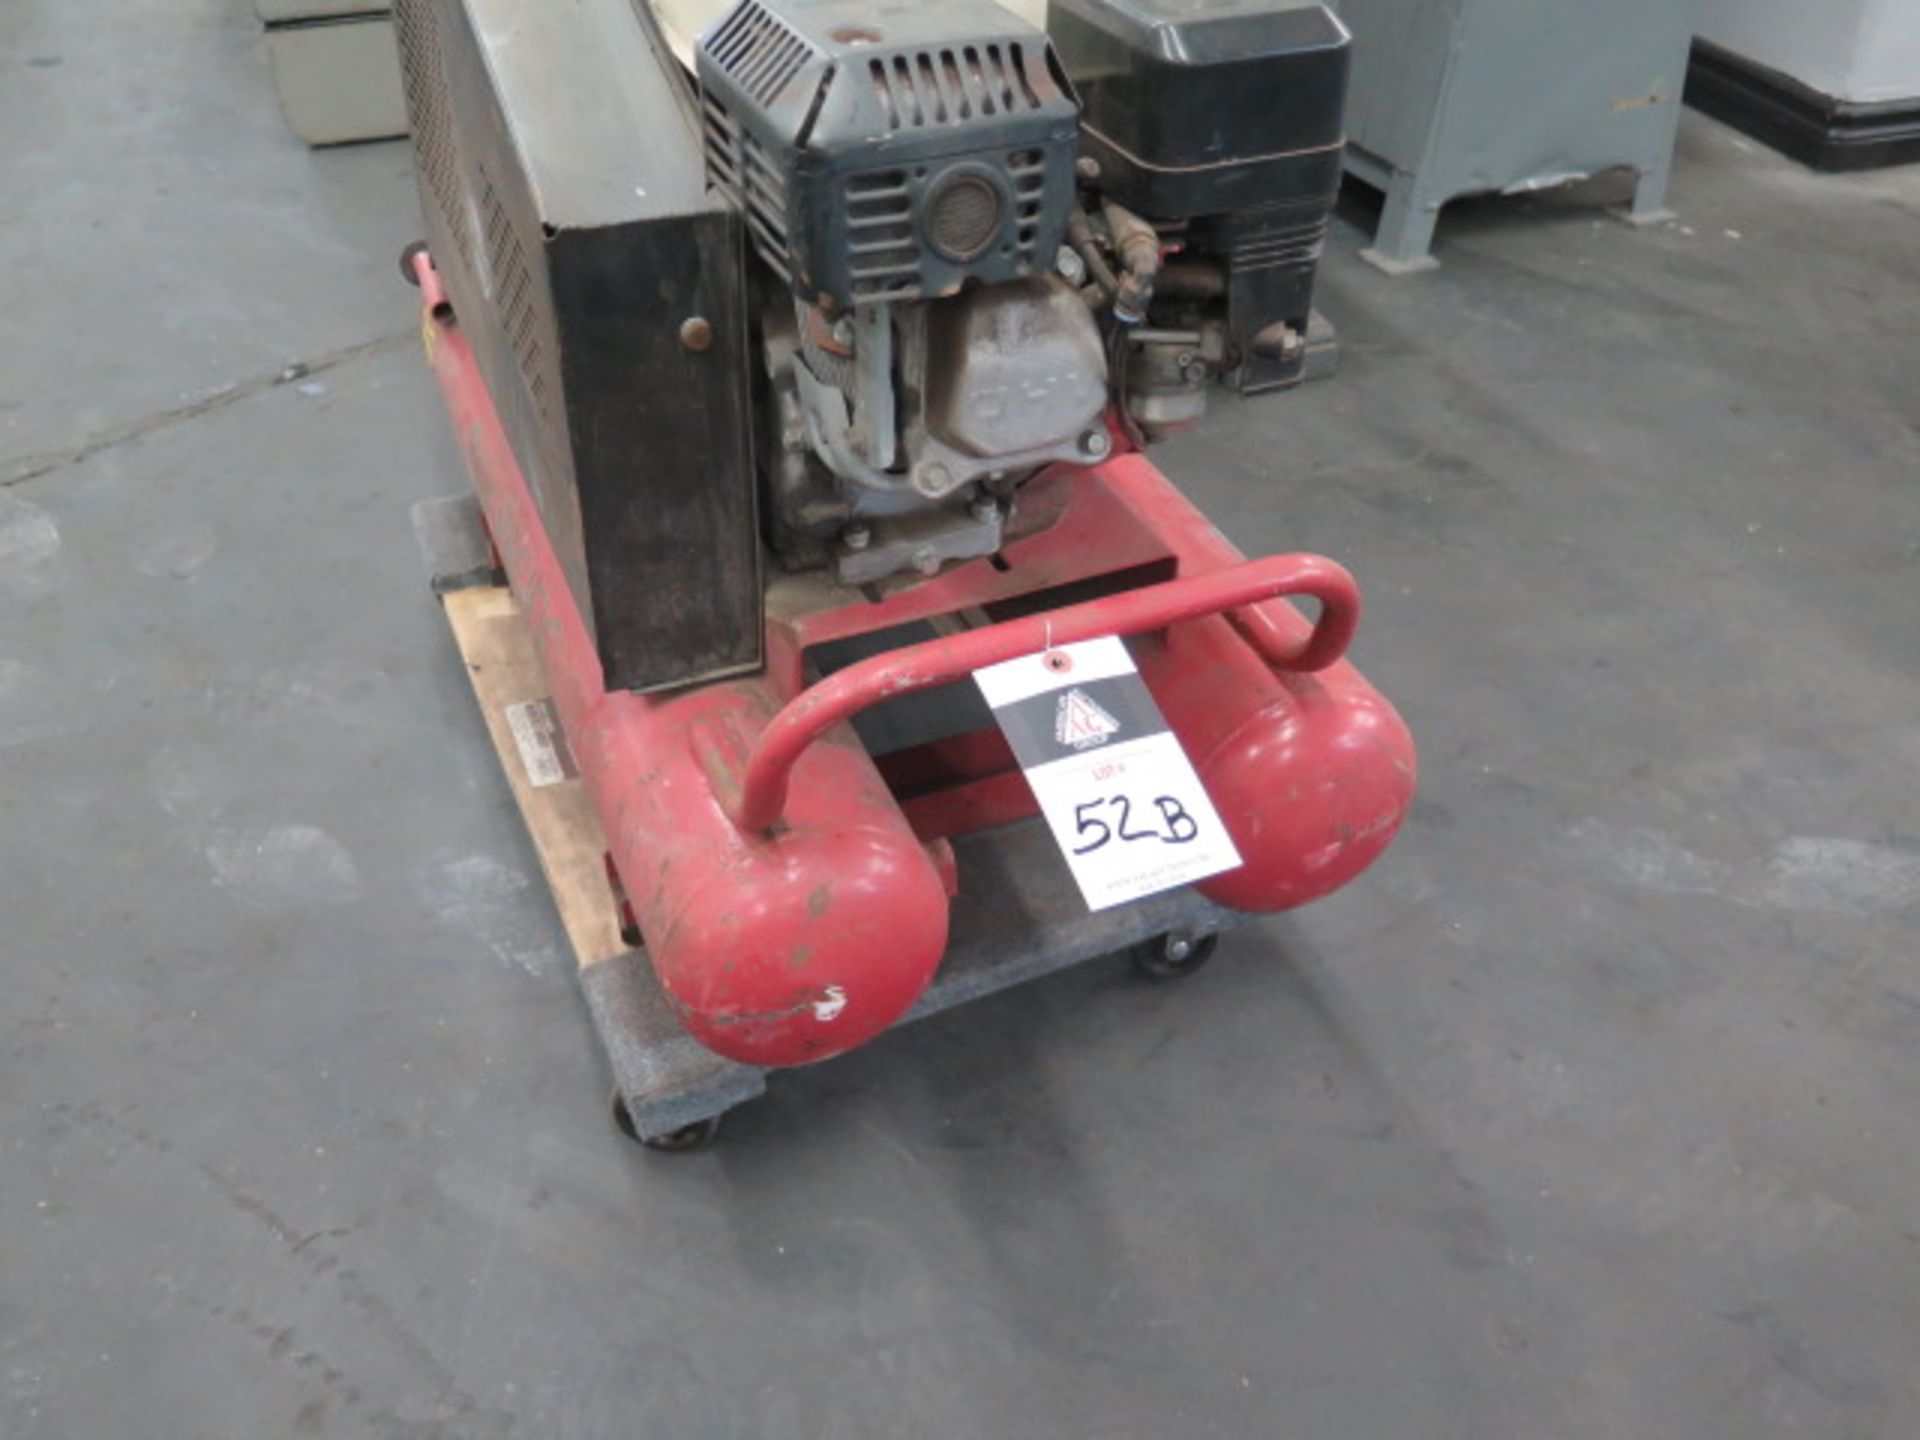 Tahoe Gas Powered Portable Air Compressor w/ Honda GX200 Gas Engine (SOLD AS-IS - NO WARRANTY) - Image 6 of 8